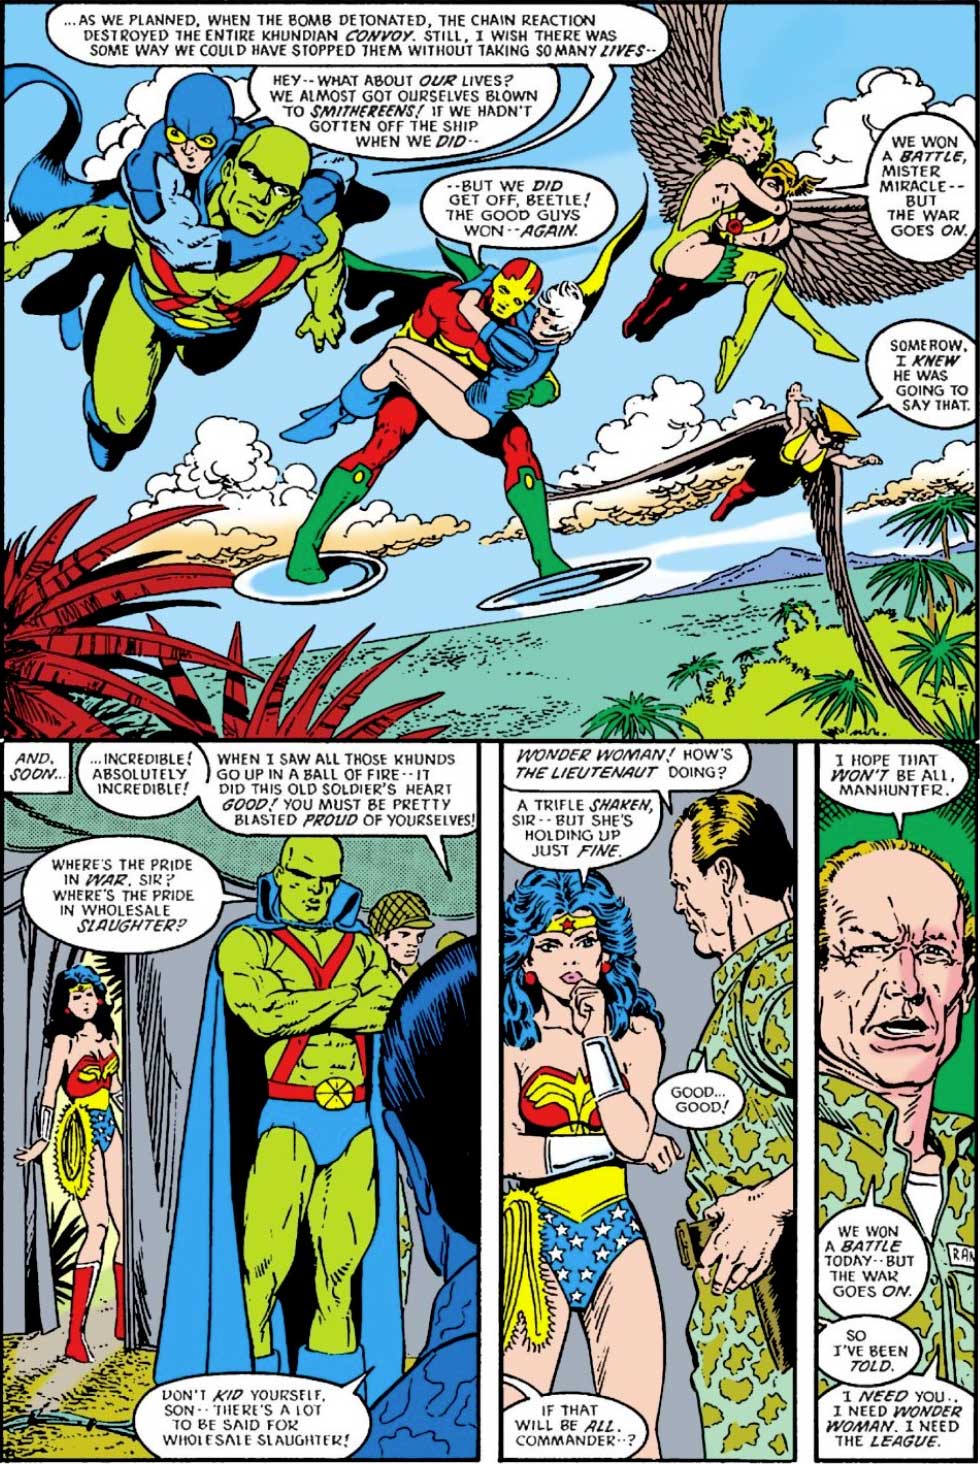 Justice League International #22 by Keith Giffen, JM DeMatteis, Kevin Maguire and Joe Rubinstein